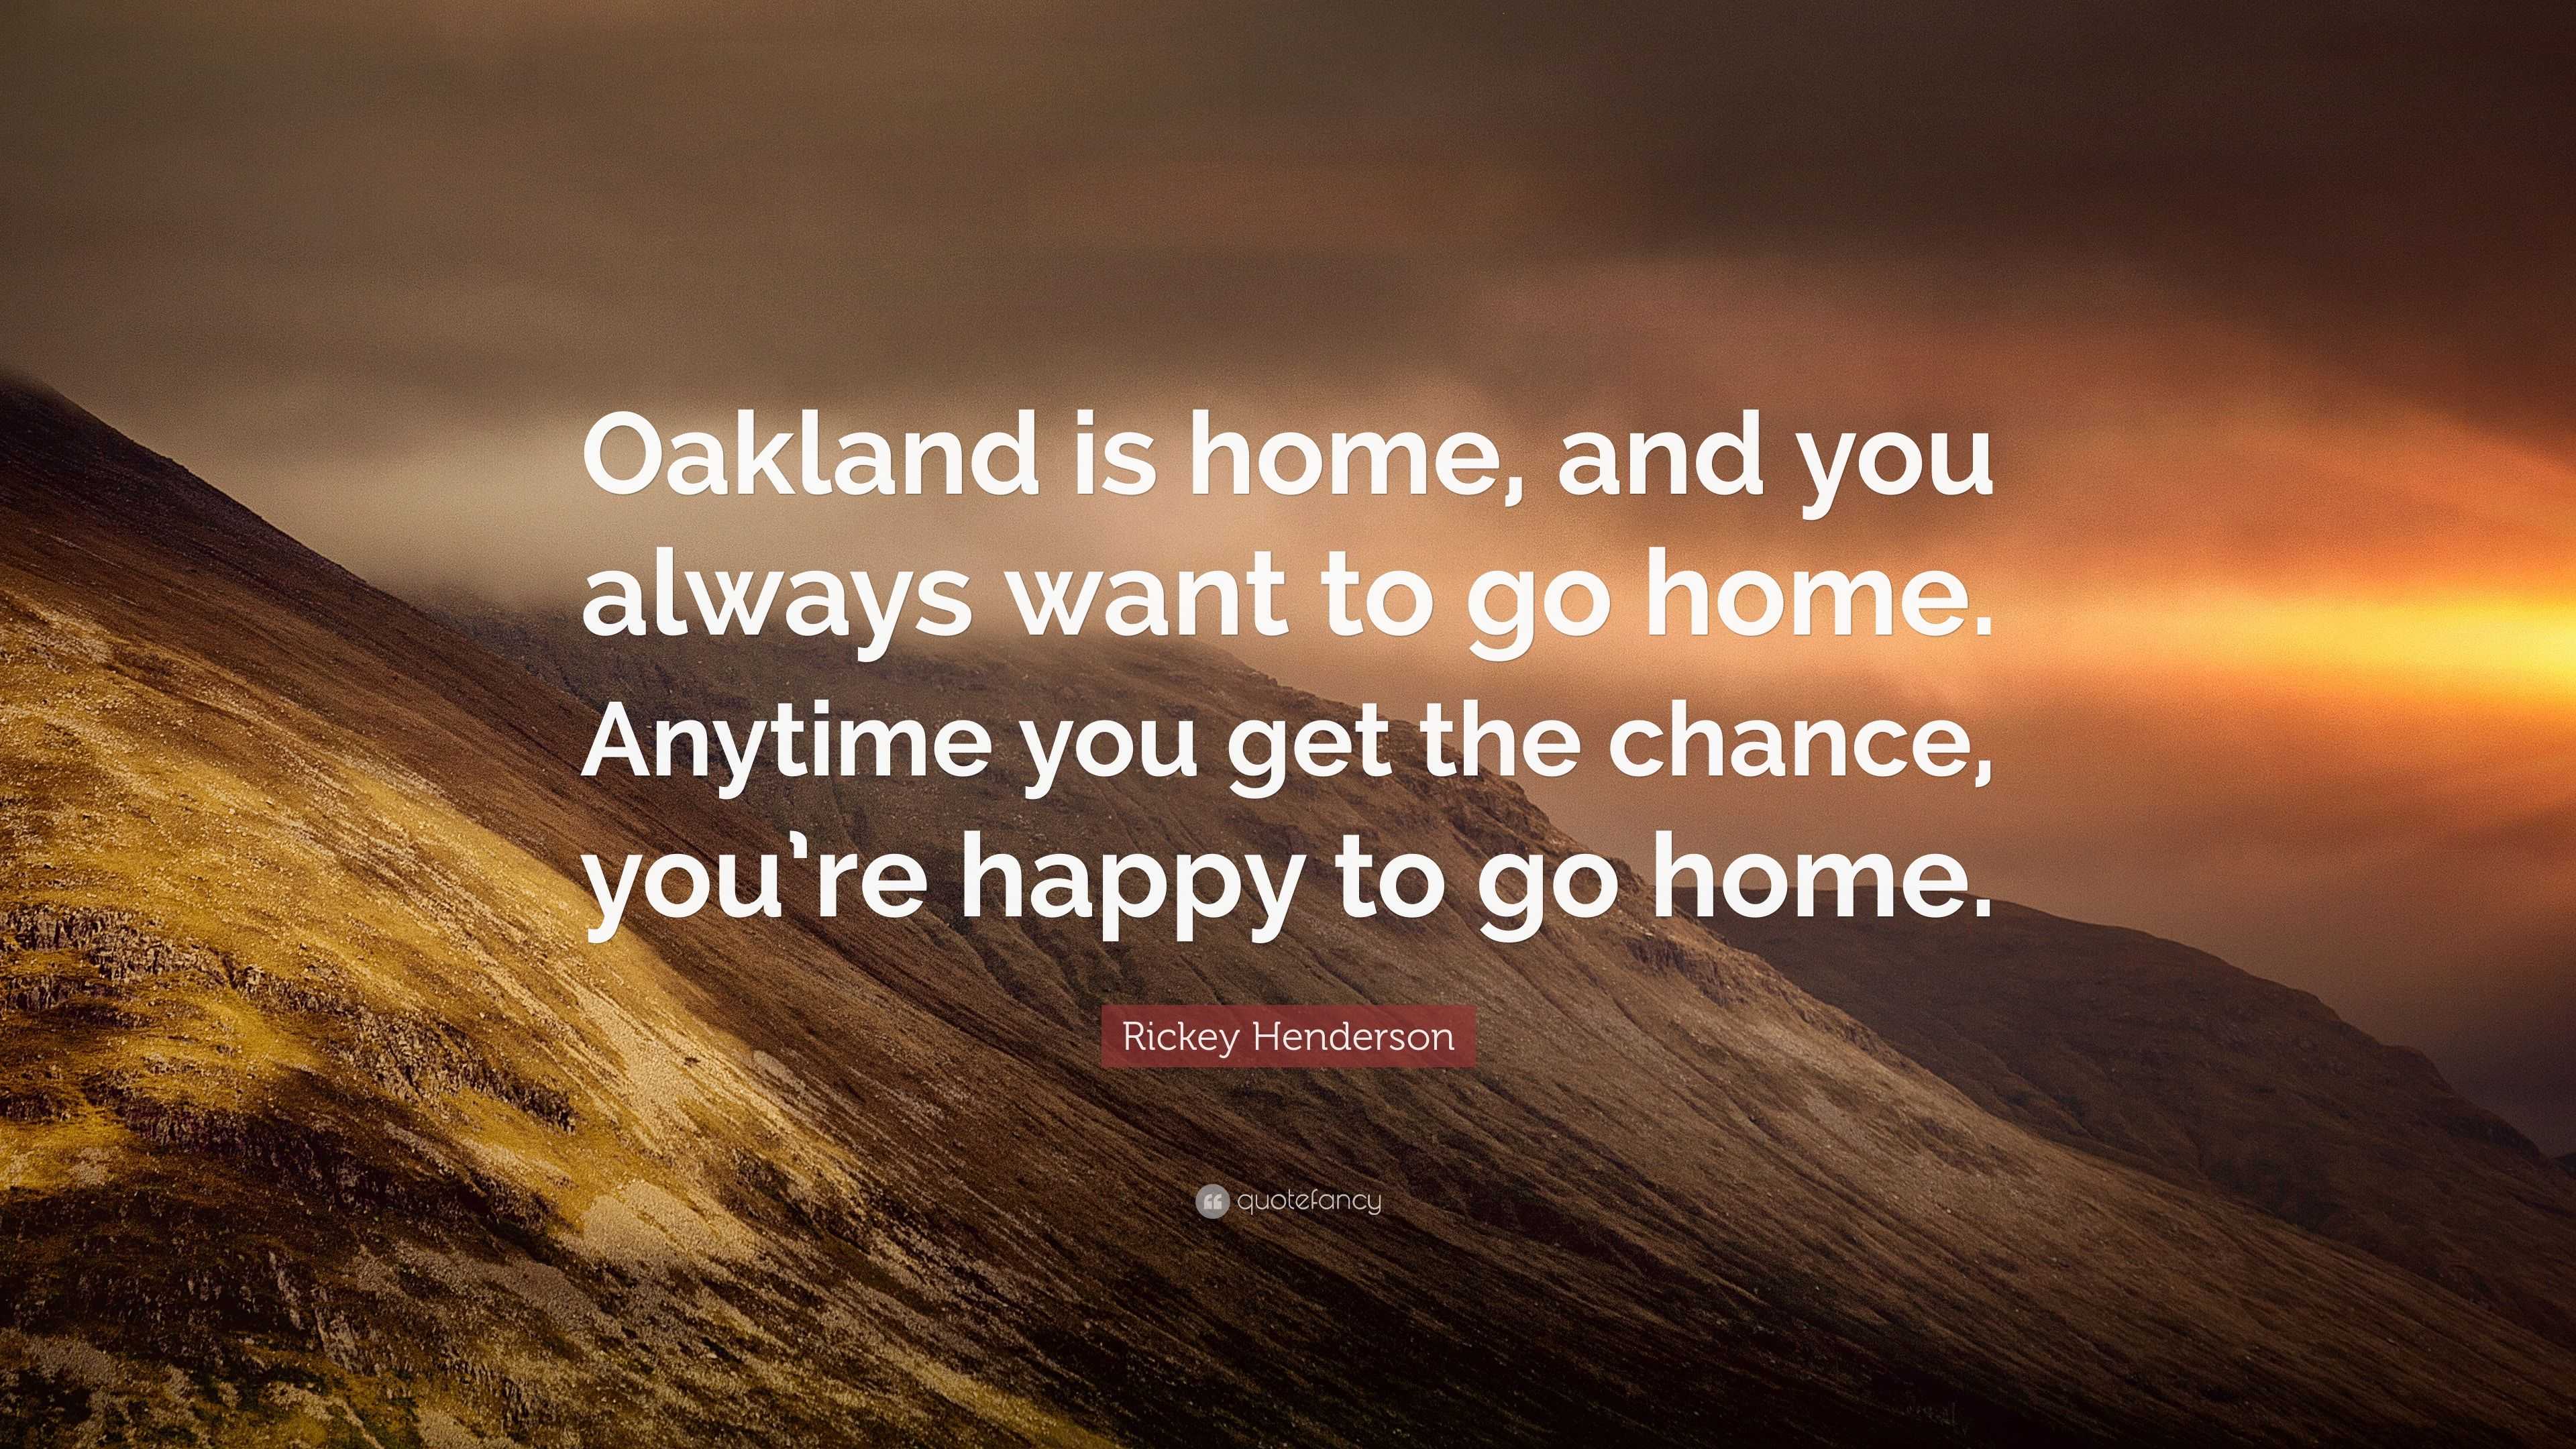 Rickey Henderson Quote Oakland Is Home And You Always Want To Go Home Anytime You Get